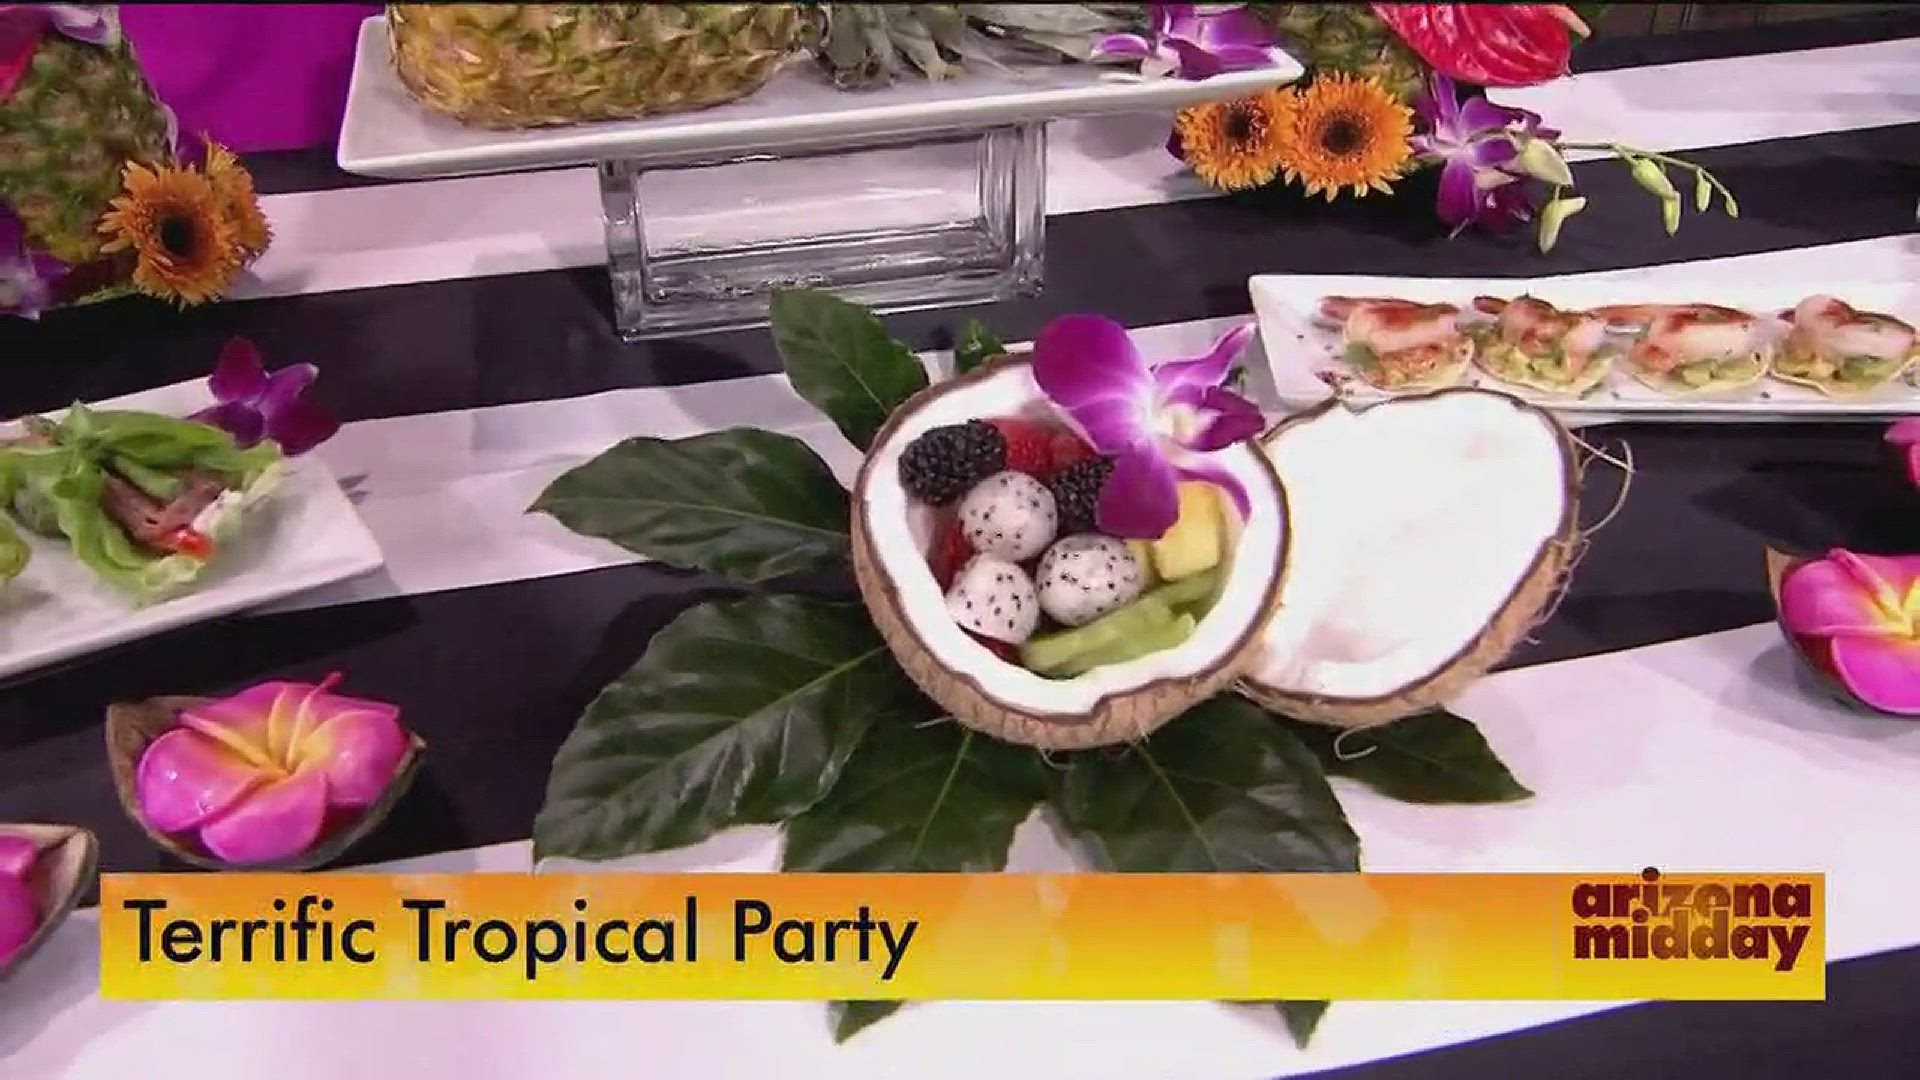 From Pineapples to floral crowns Sally Arnold from Celebrations By Sally shows us how to throw the perfect tropical party.